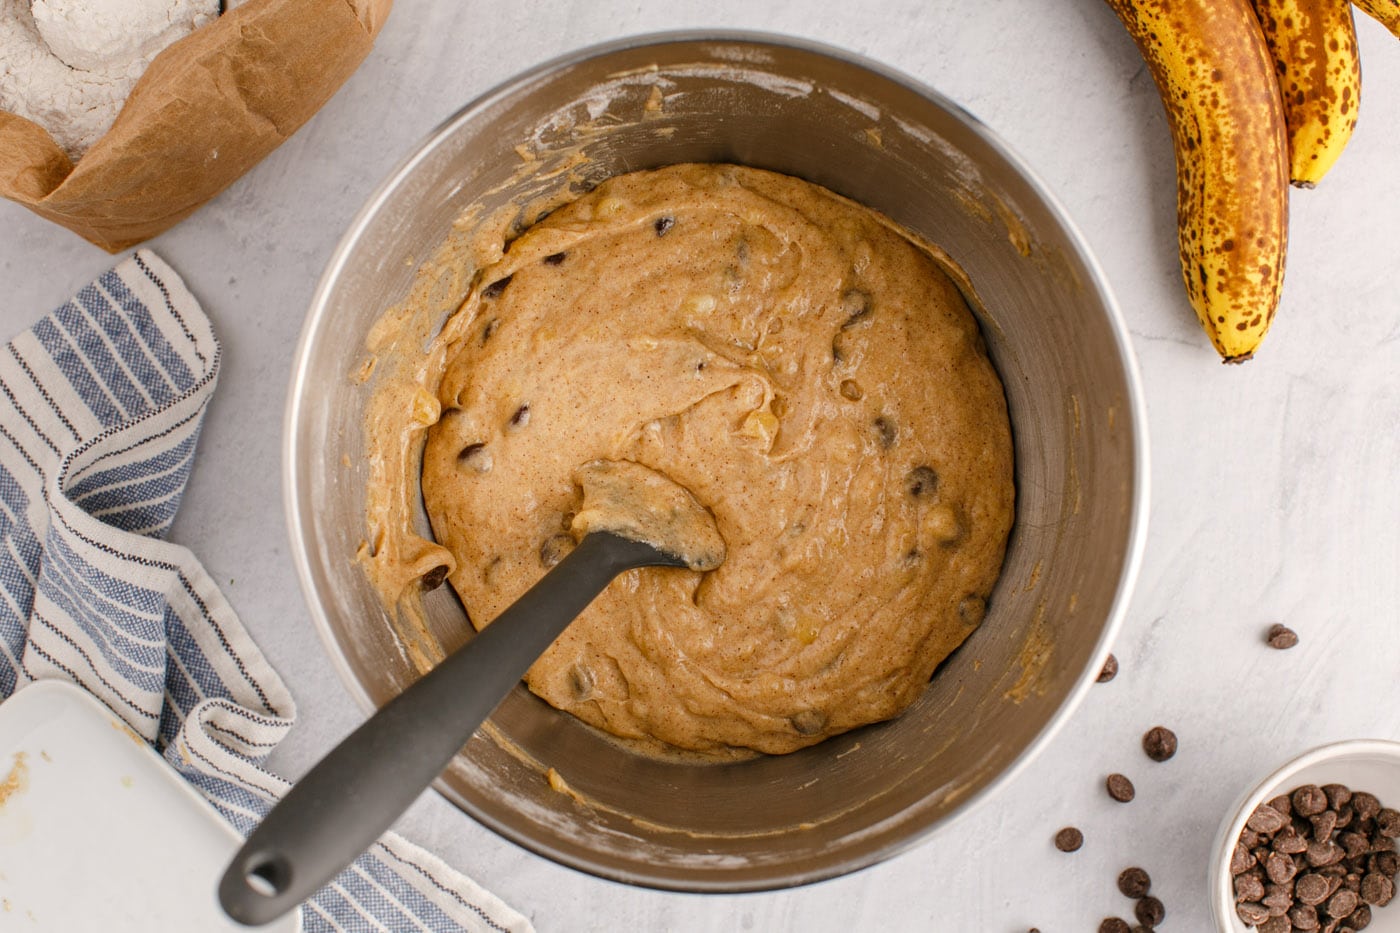 mixed banana bread batter with chocolate chips